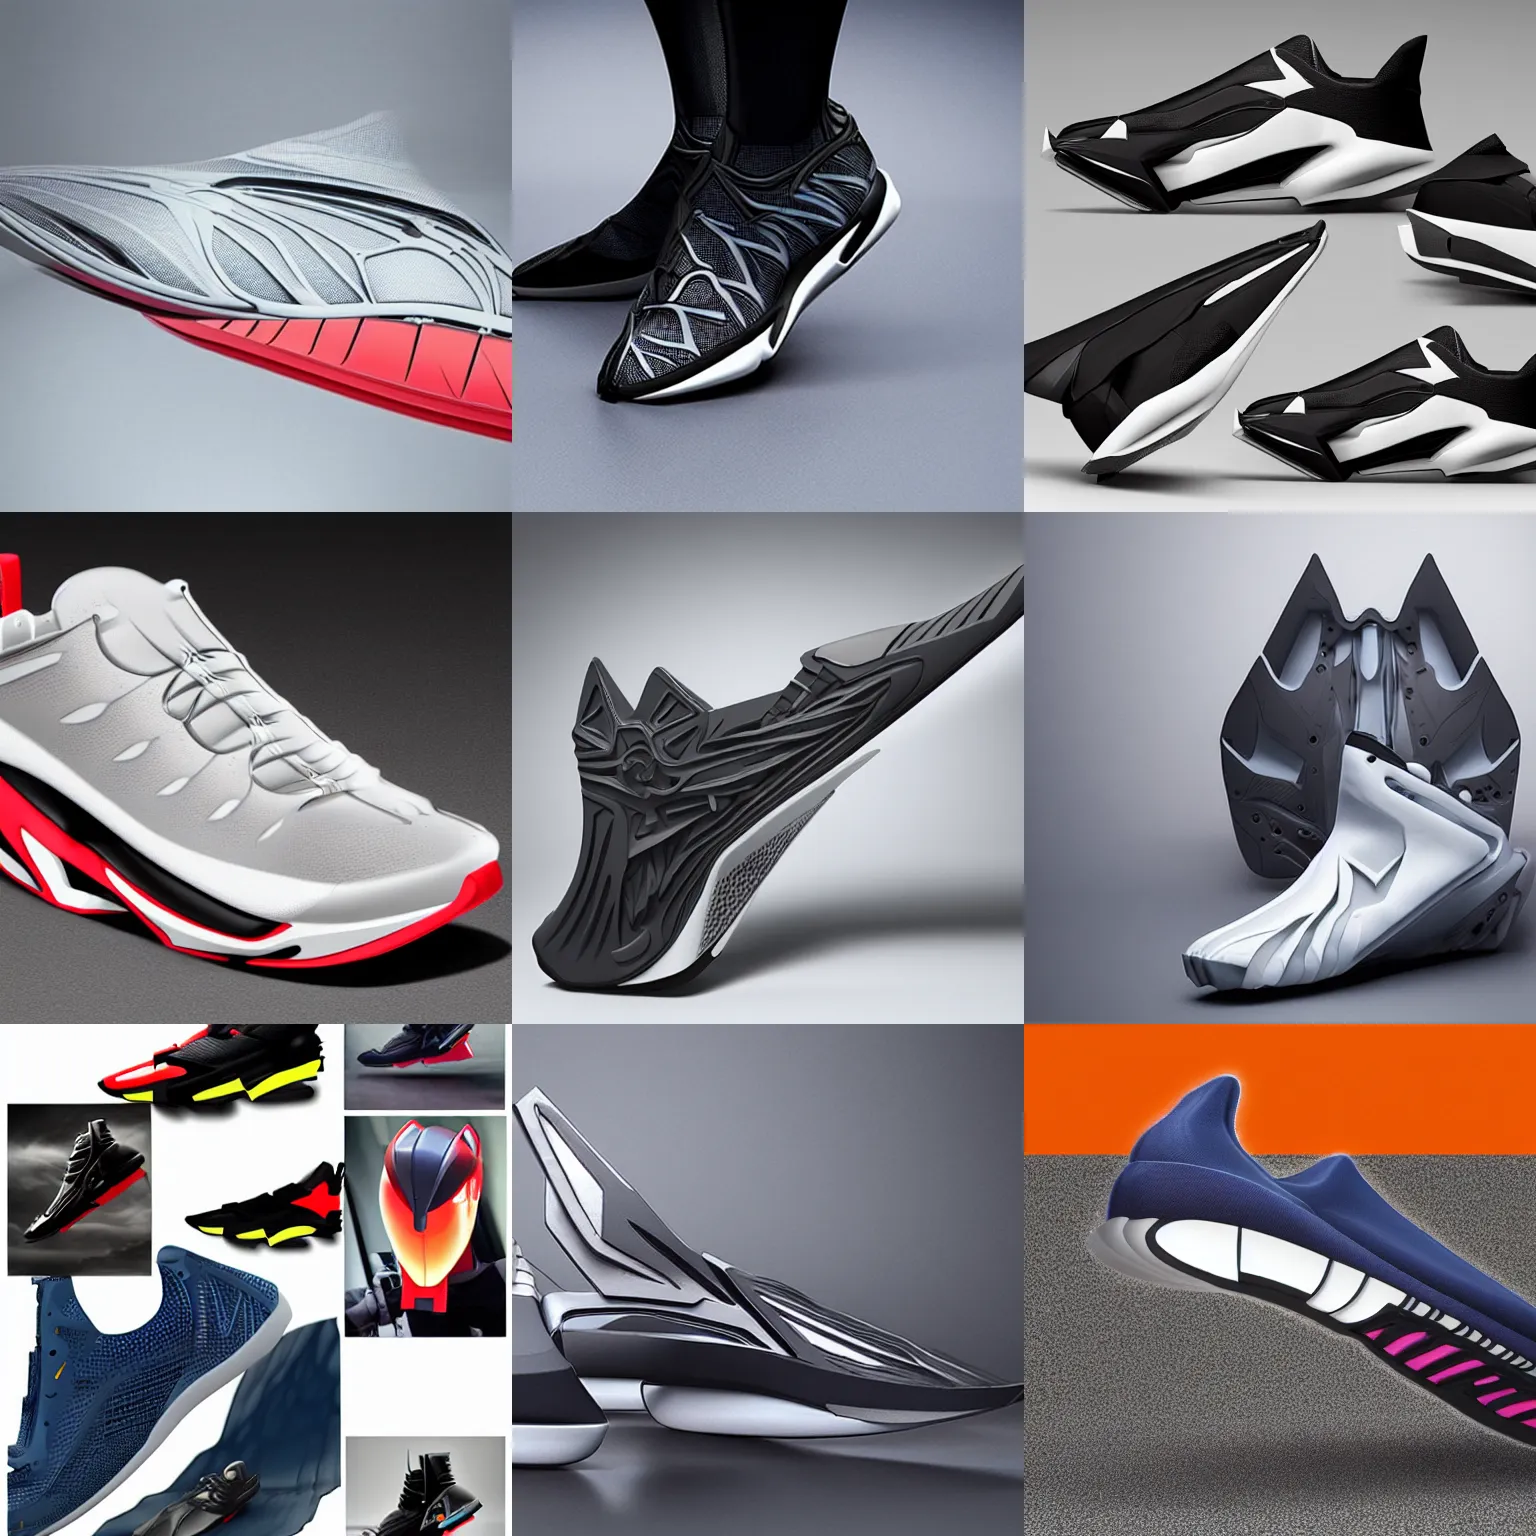 running shoe inspired by Gundam, H.R. Giger, Zaha | Stable Diffusion ...